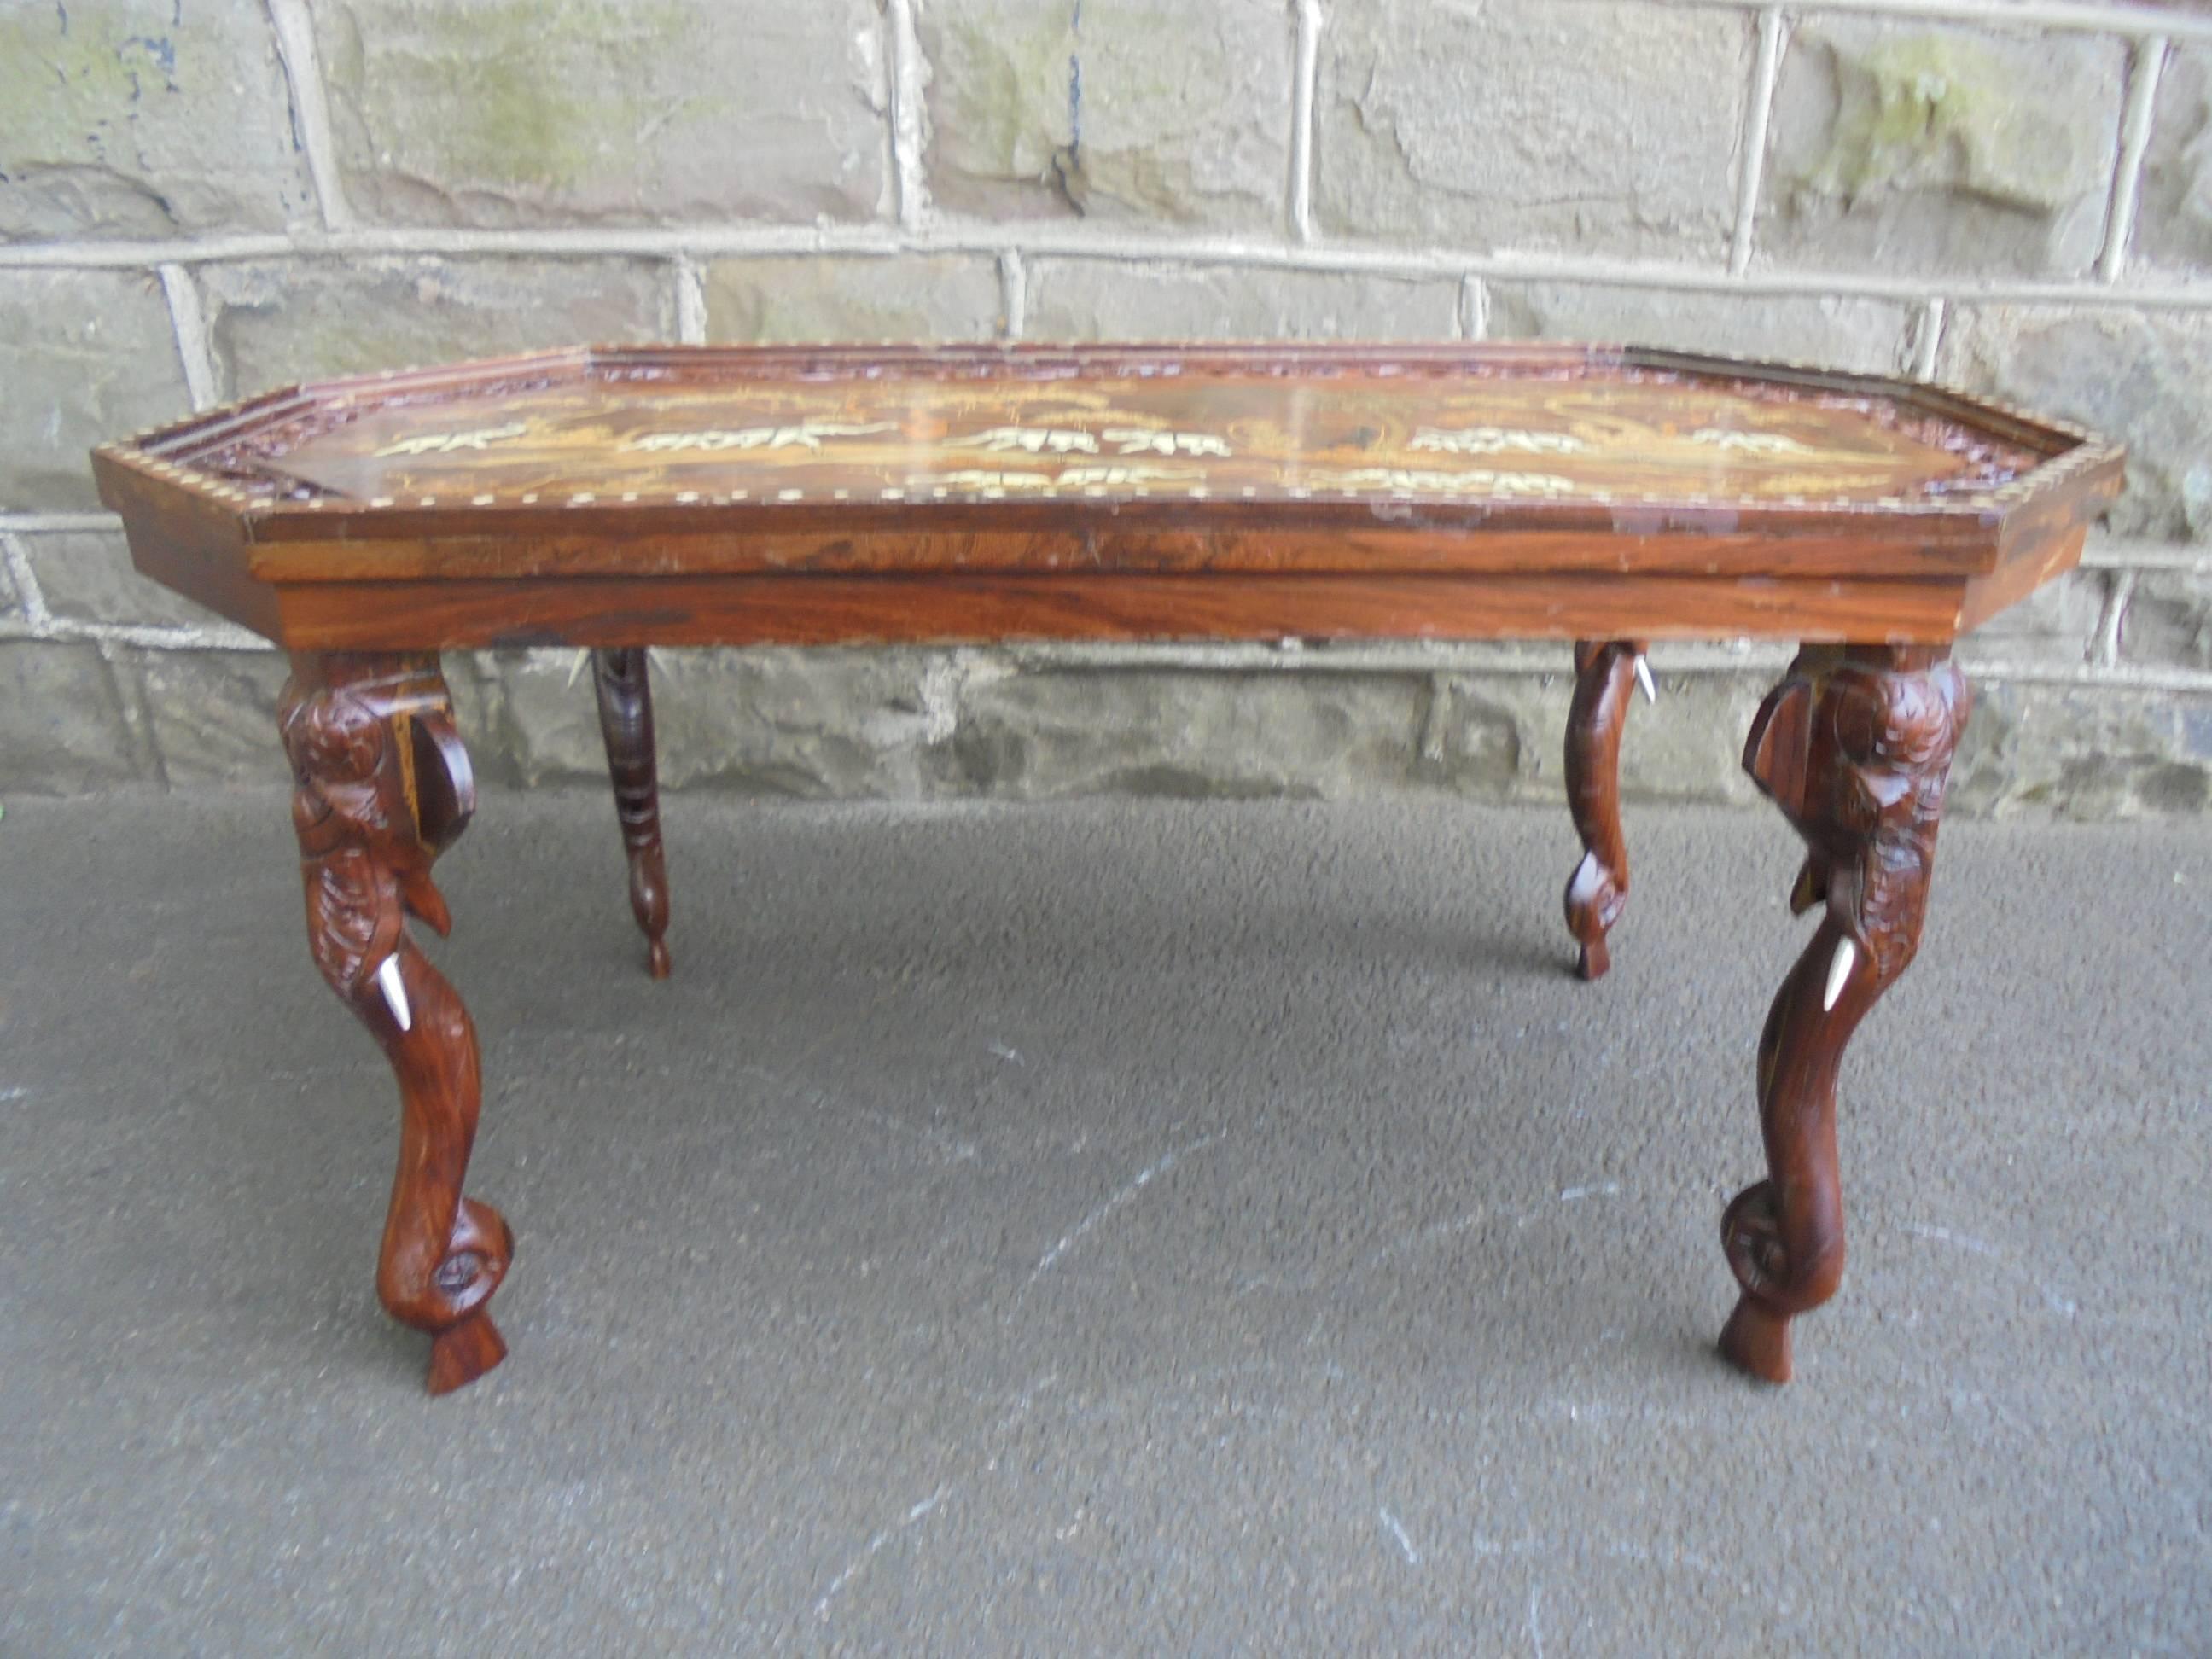 Antique Anglo-Indian Inlaid Hardwood Coffee Table In Good Condition For Sale In Wakefield, GB